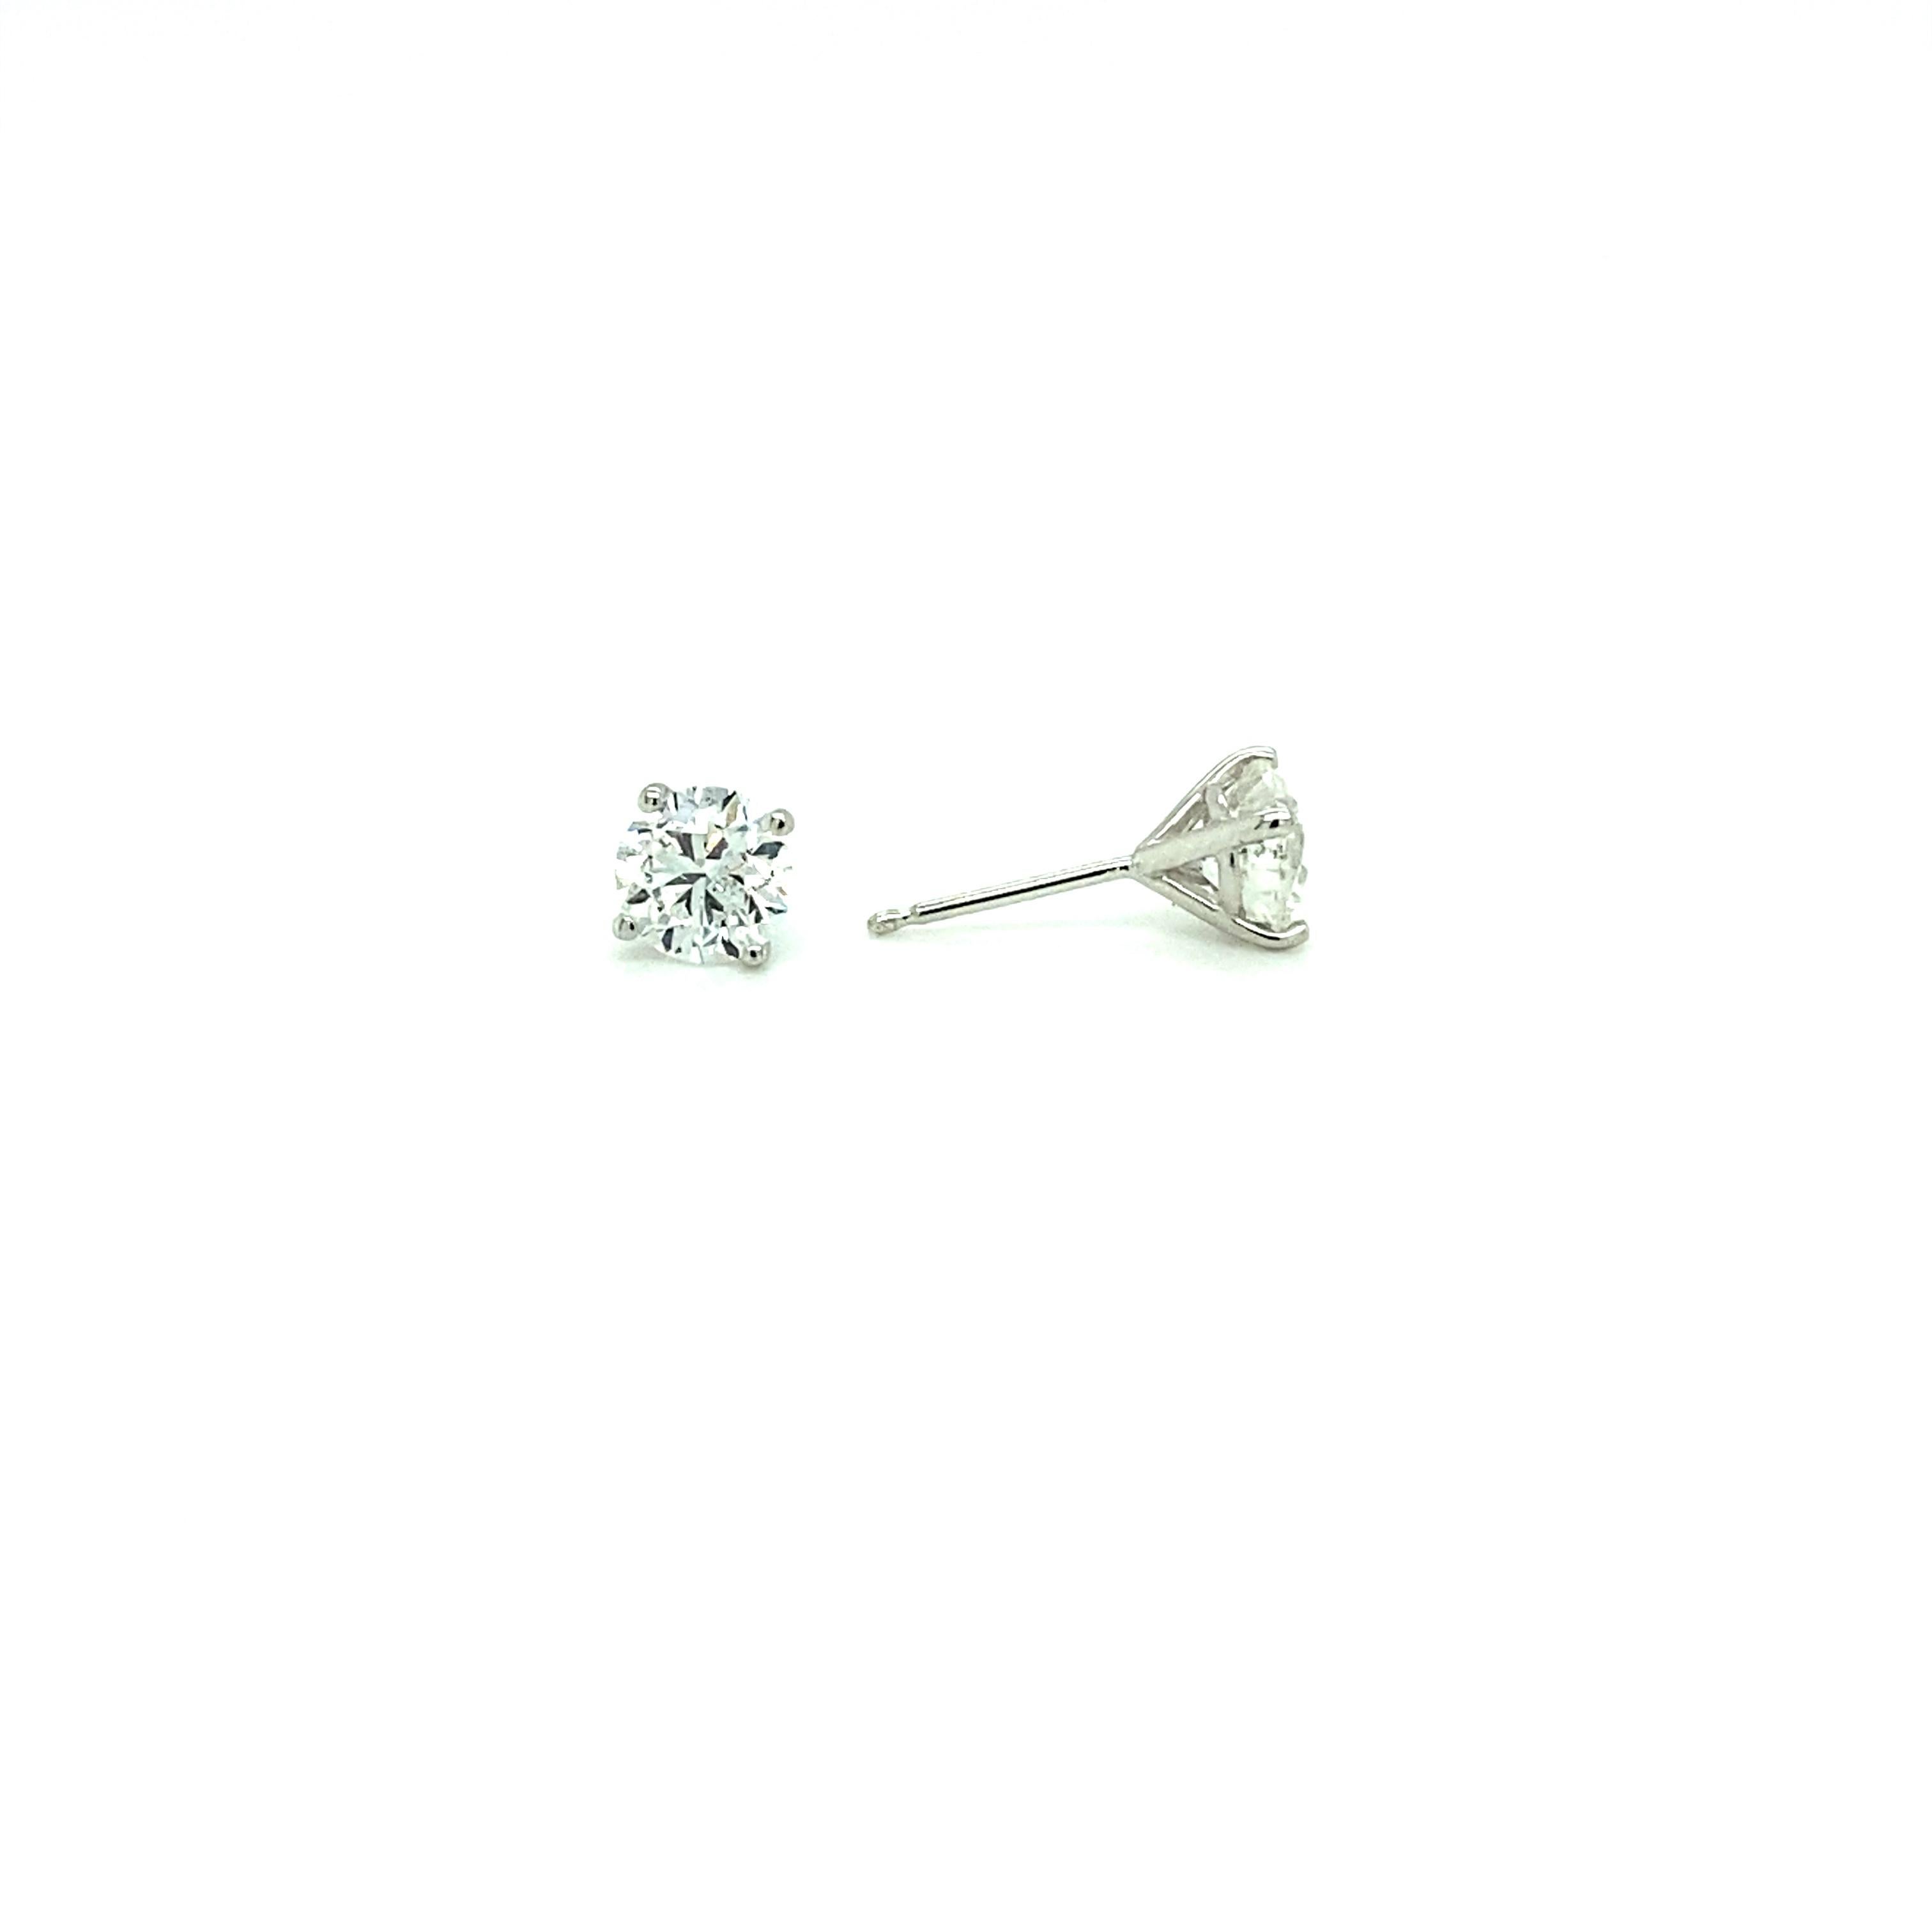 Offered here is a classic 1.81 ct total weight Diamond stud. 
Diamonds are set in a 4-prong martini setting with heavy push-backs. 
The earrings are 14kt White Gold. 
Diamonds 1.81 total weight (0.905 ct each) Color is H-I and Clarity is SI2.